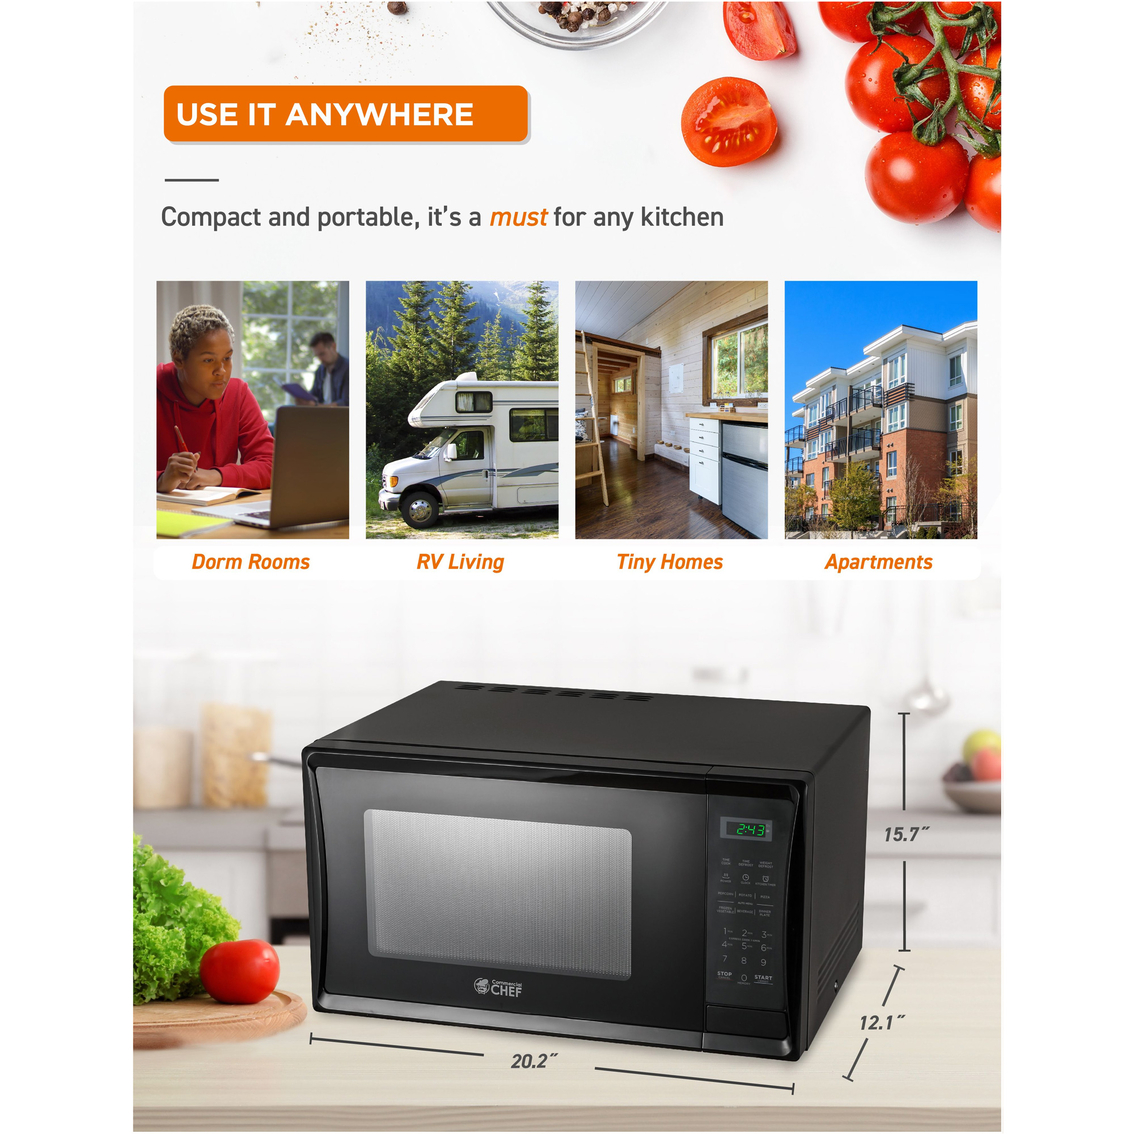 Commercial Chef 1.1 Cu. Ft. Countertop Microwave Oven - Image 7 of 7